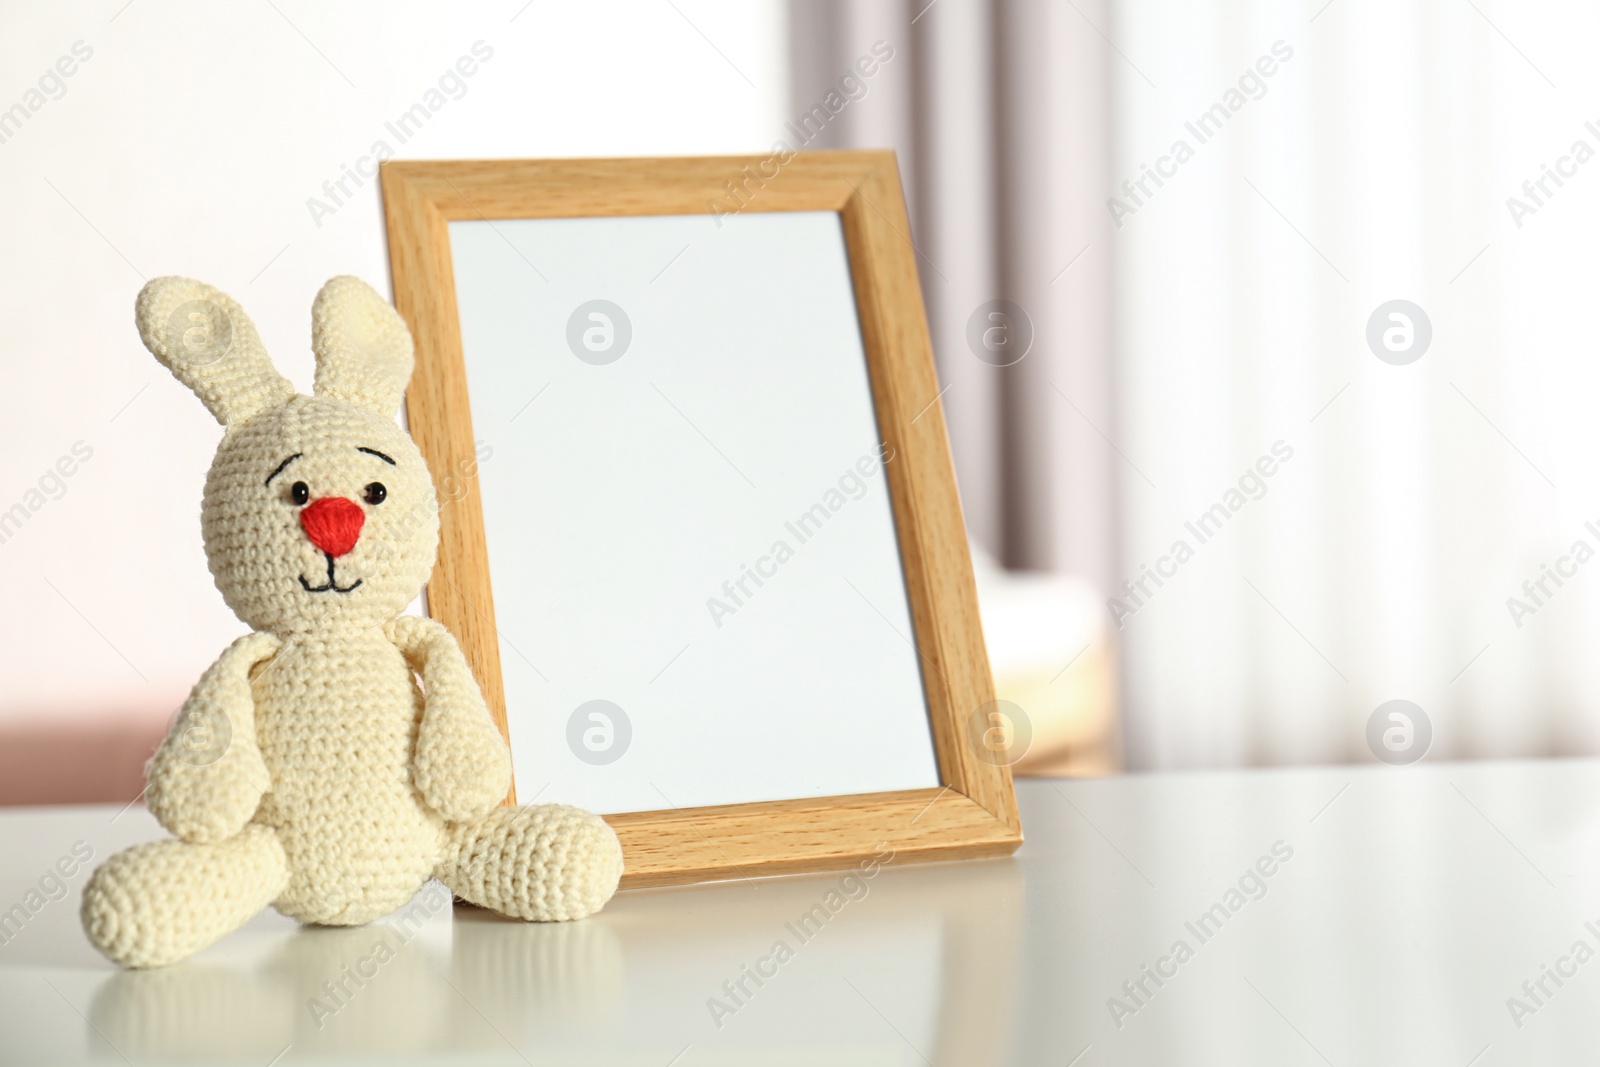 Photo of Photo frame and toy bunny on table in baby room interior. Space for text